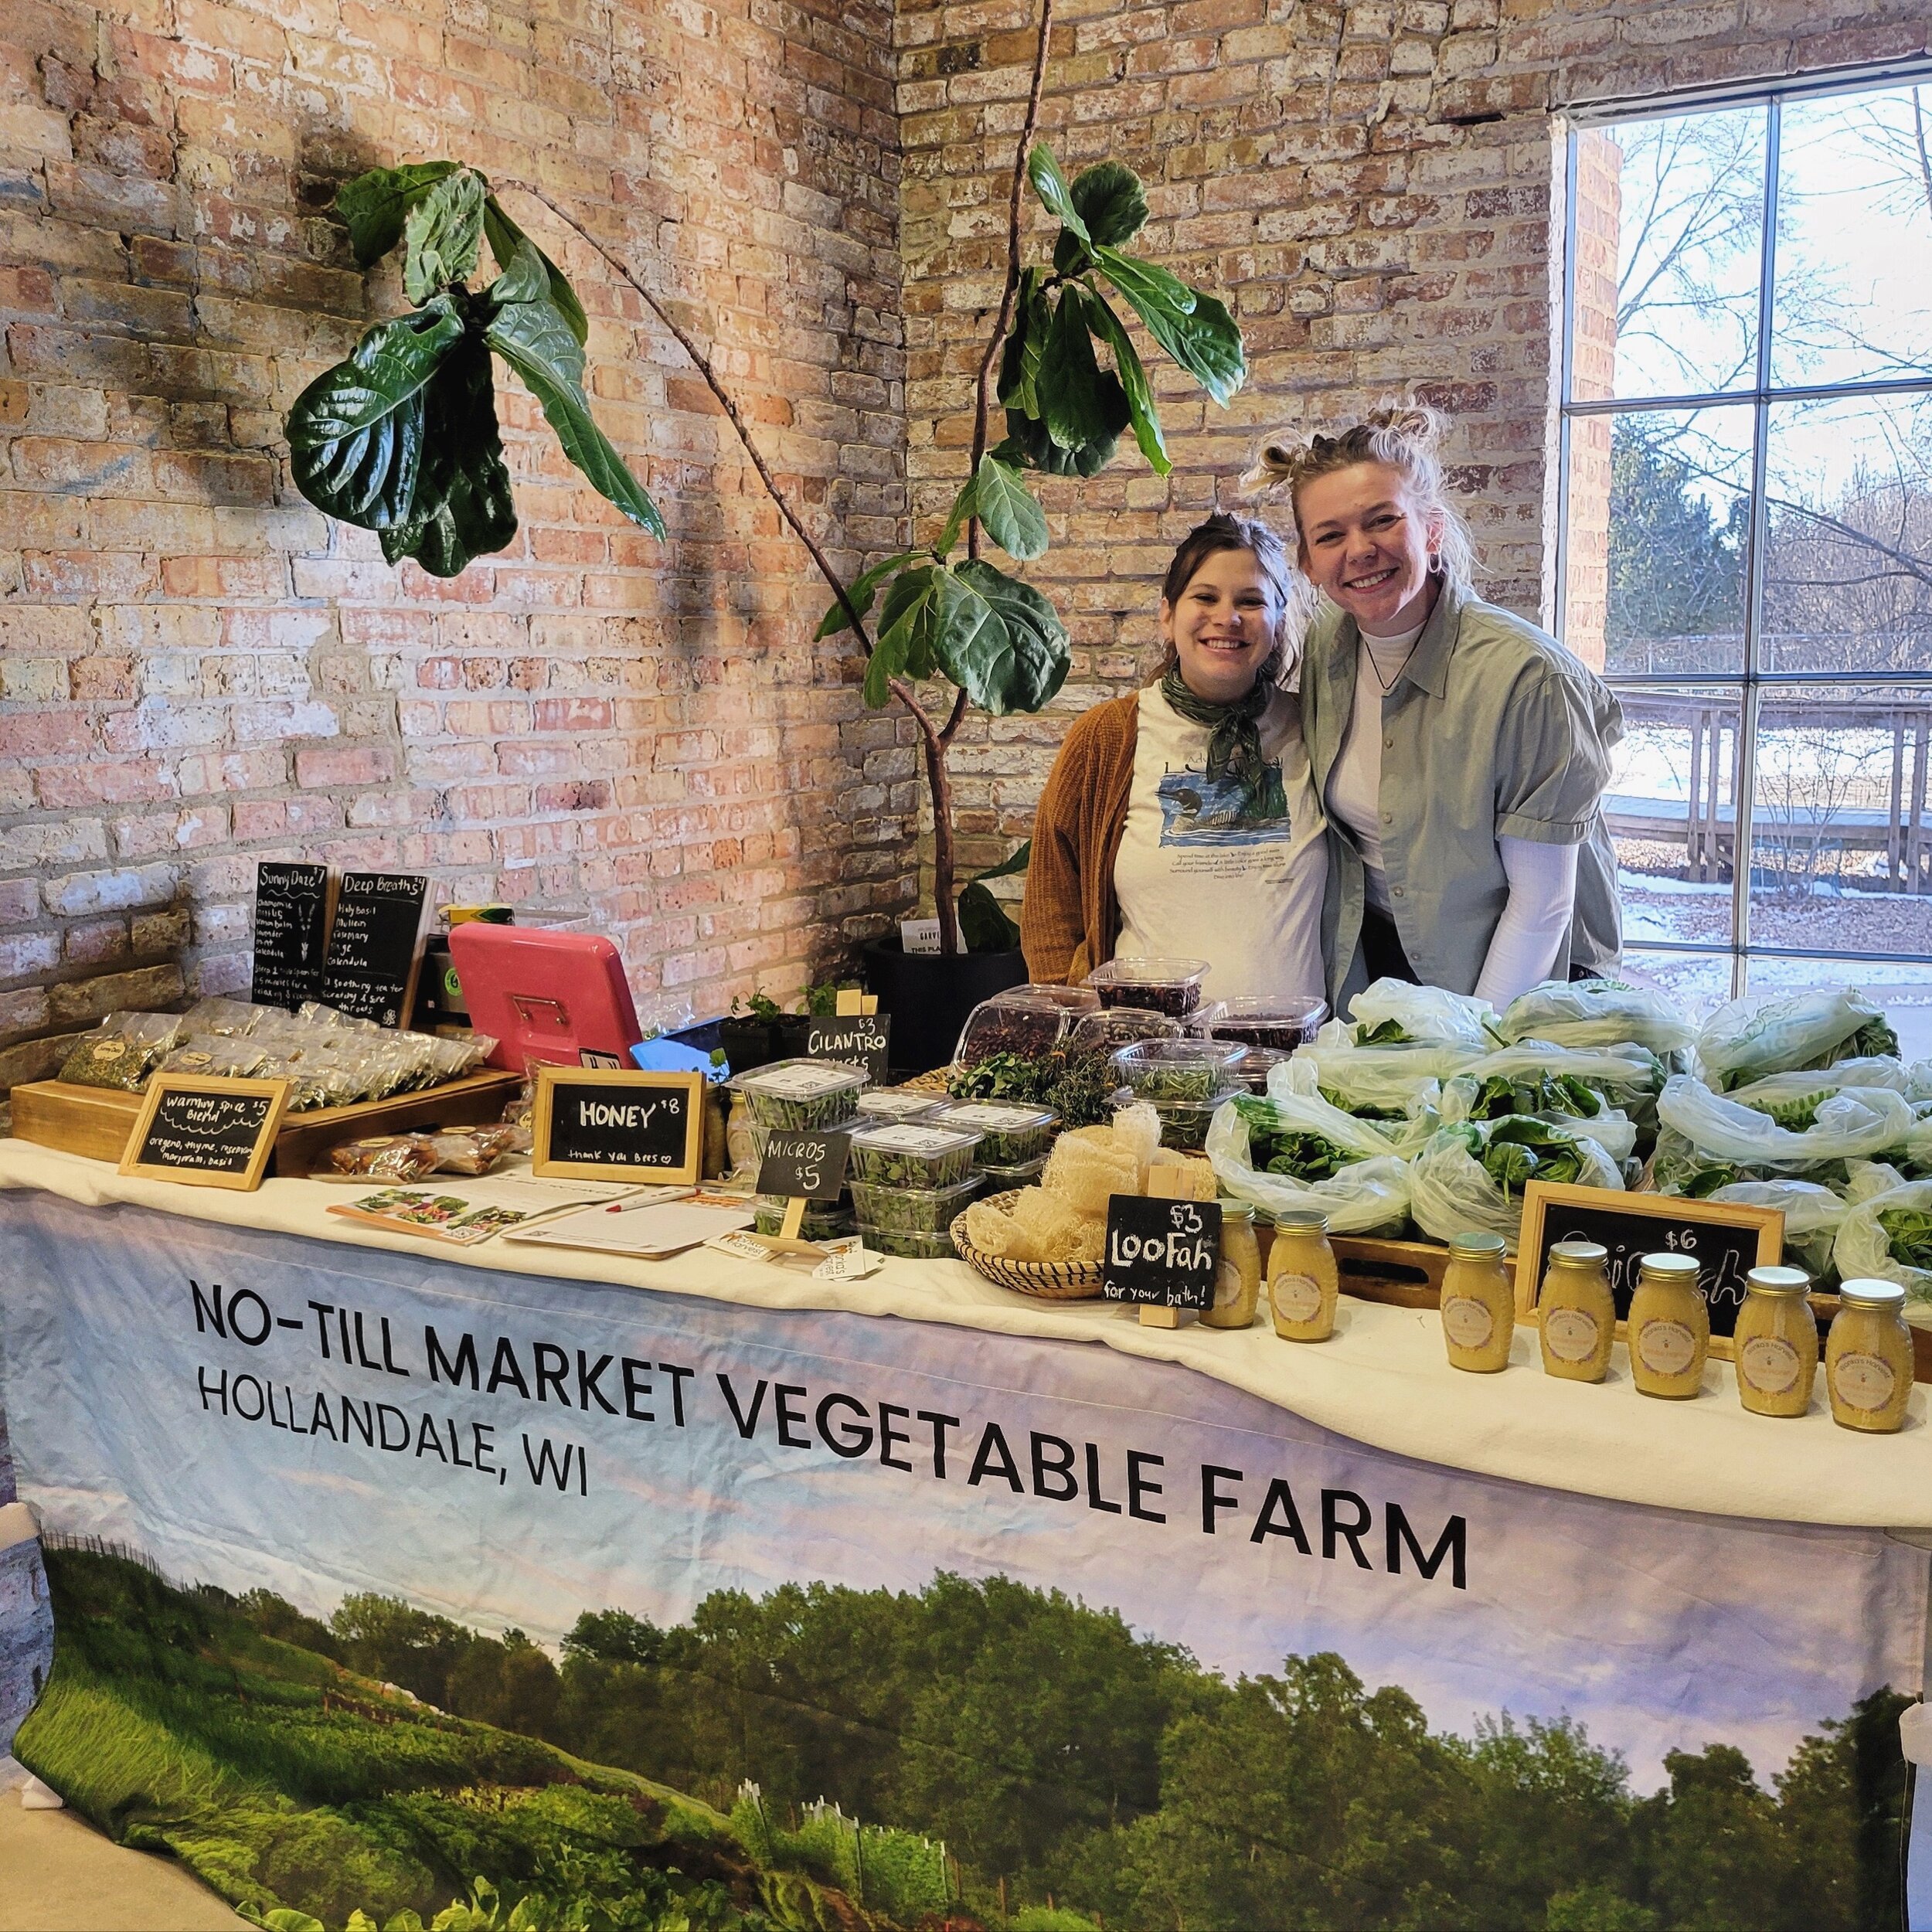 It was a special treat to be at Garver Feed Mill on Saturday for the @danecofm&rsquo;s Late Winter Farmers Market. Lots of familiar faces and friends, and we felt right at home with our fellow market vendors. Excited to get outside on the Square in A